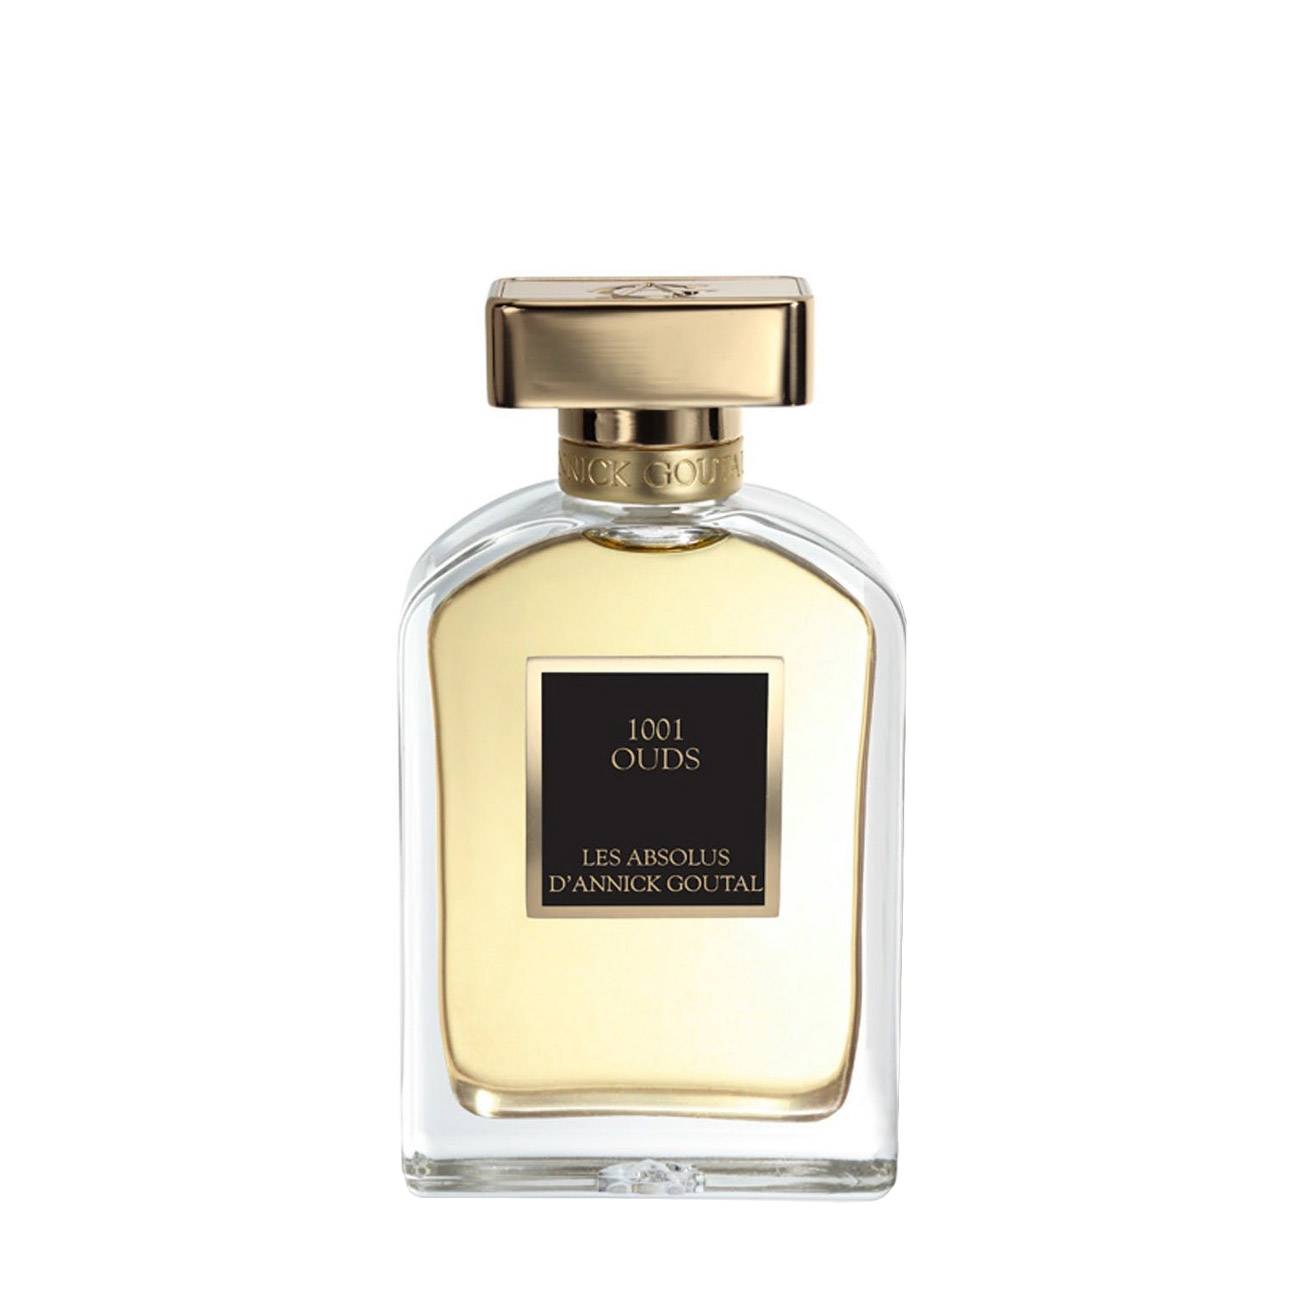 1001 OUDS 75 ml Annick Goutal